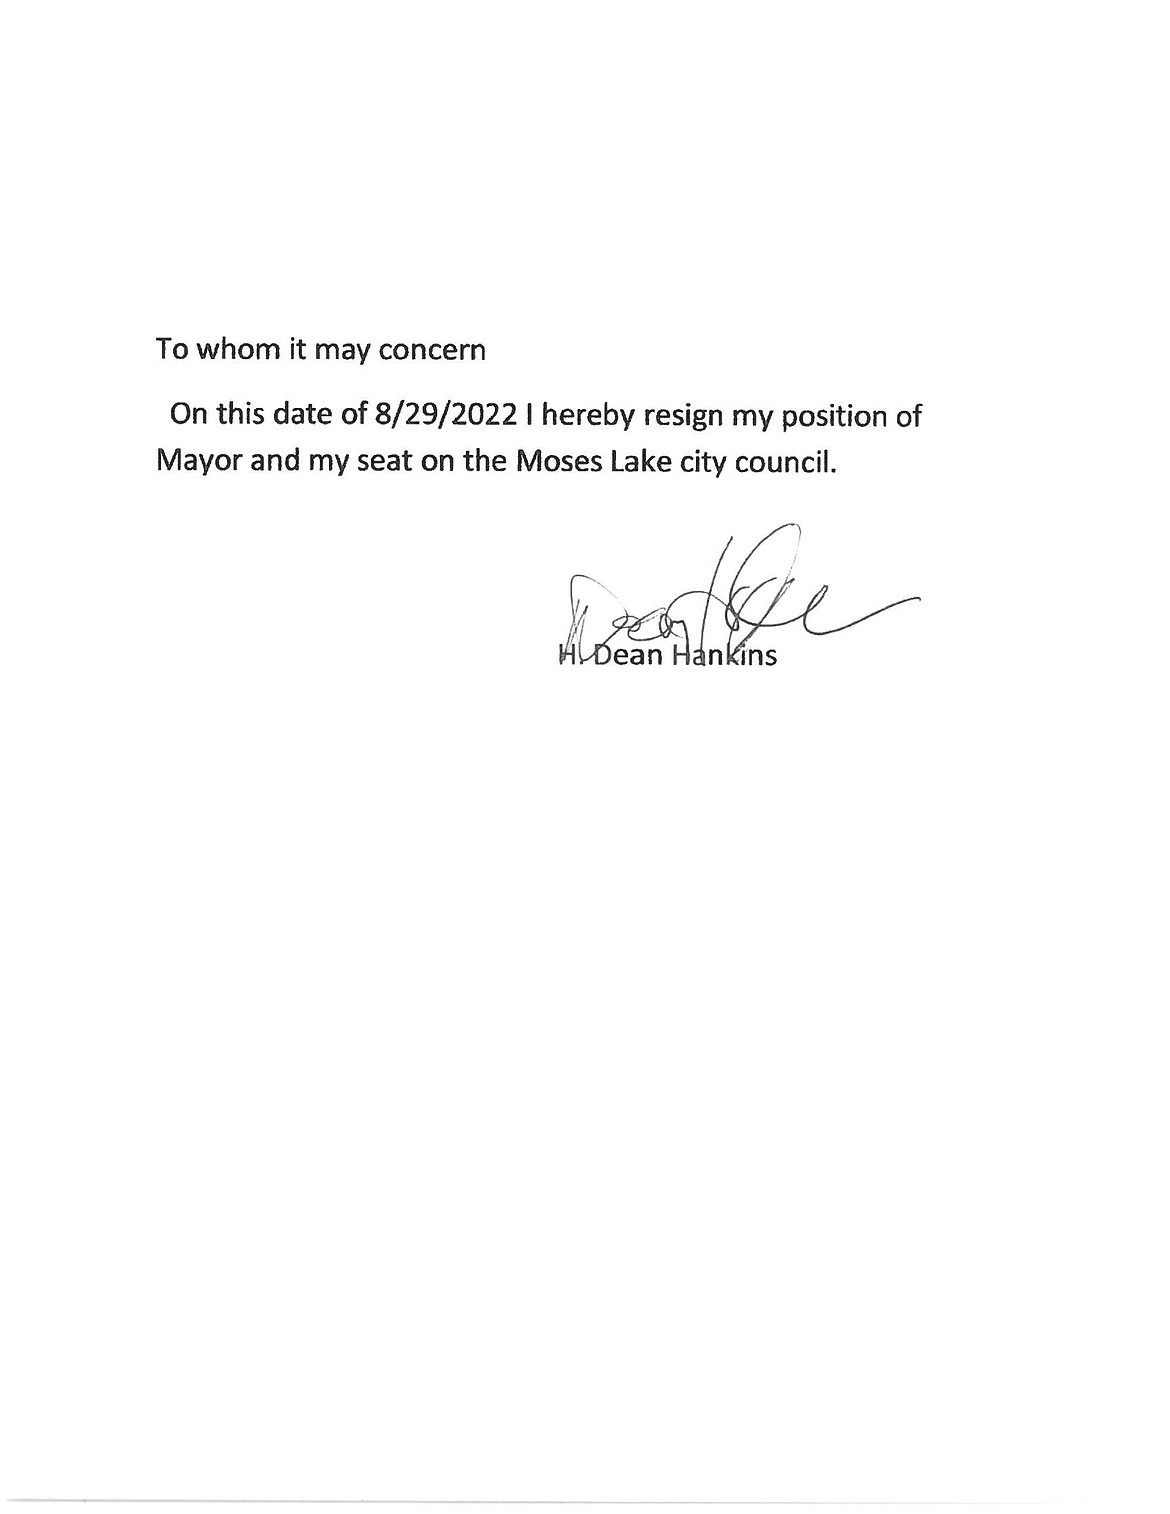 Now-former Moses Lake Mayor Dean Hankins submitted this brief resignation letter on Monday.